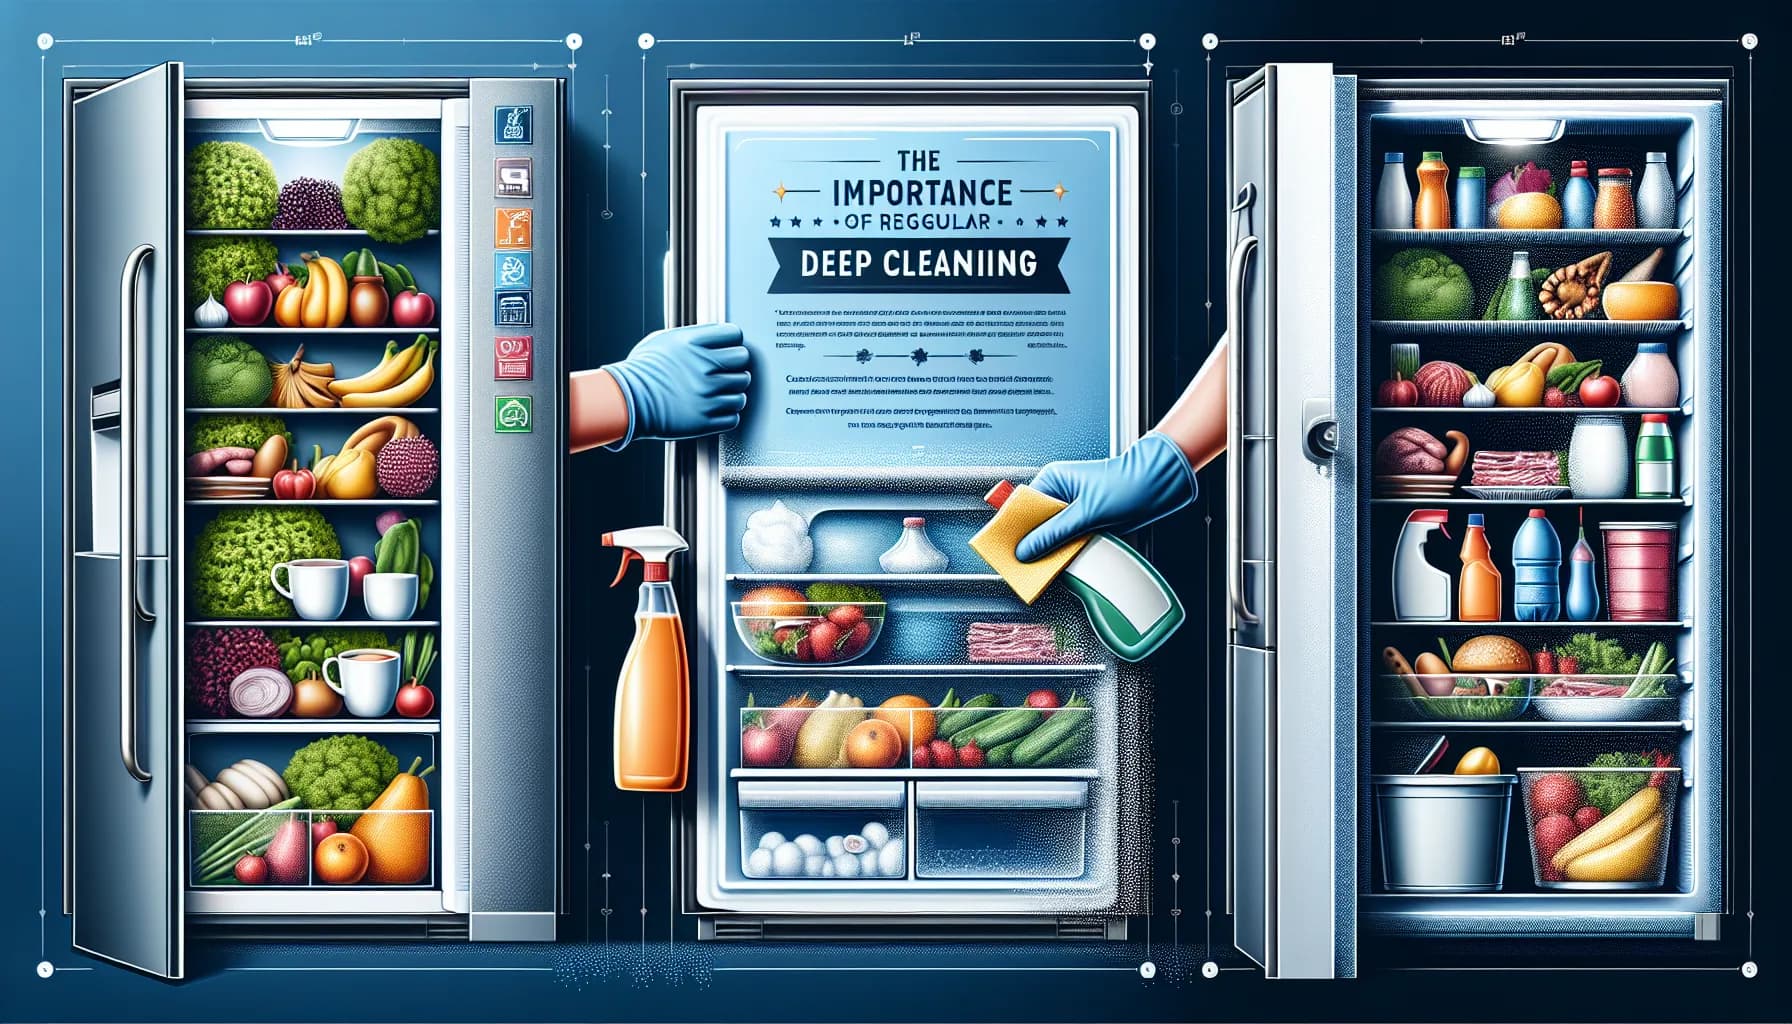 Sparkling clean fridge filled with fresh food, being deep cleaned by gloved hands. Emphasizing regular deep cleaning for fridge maintenance.